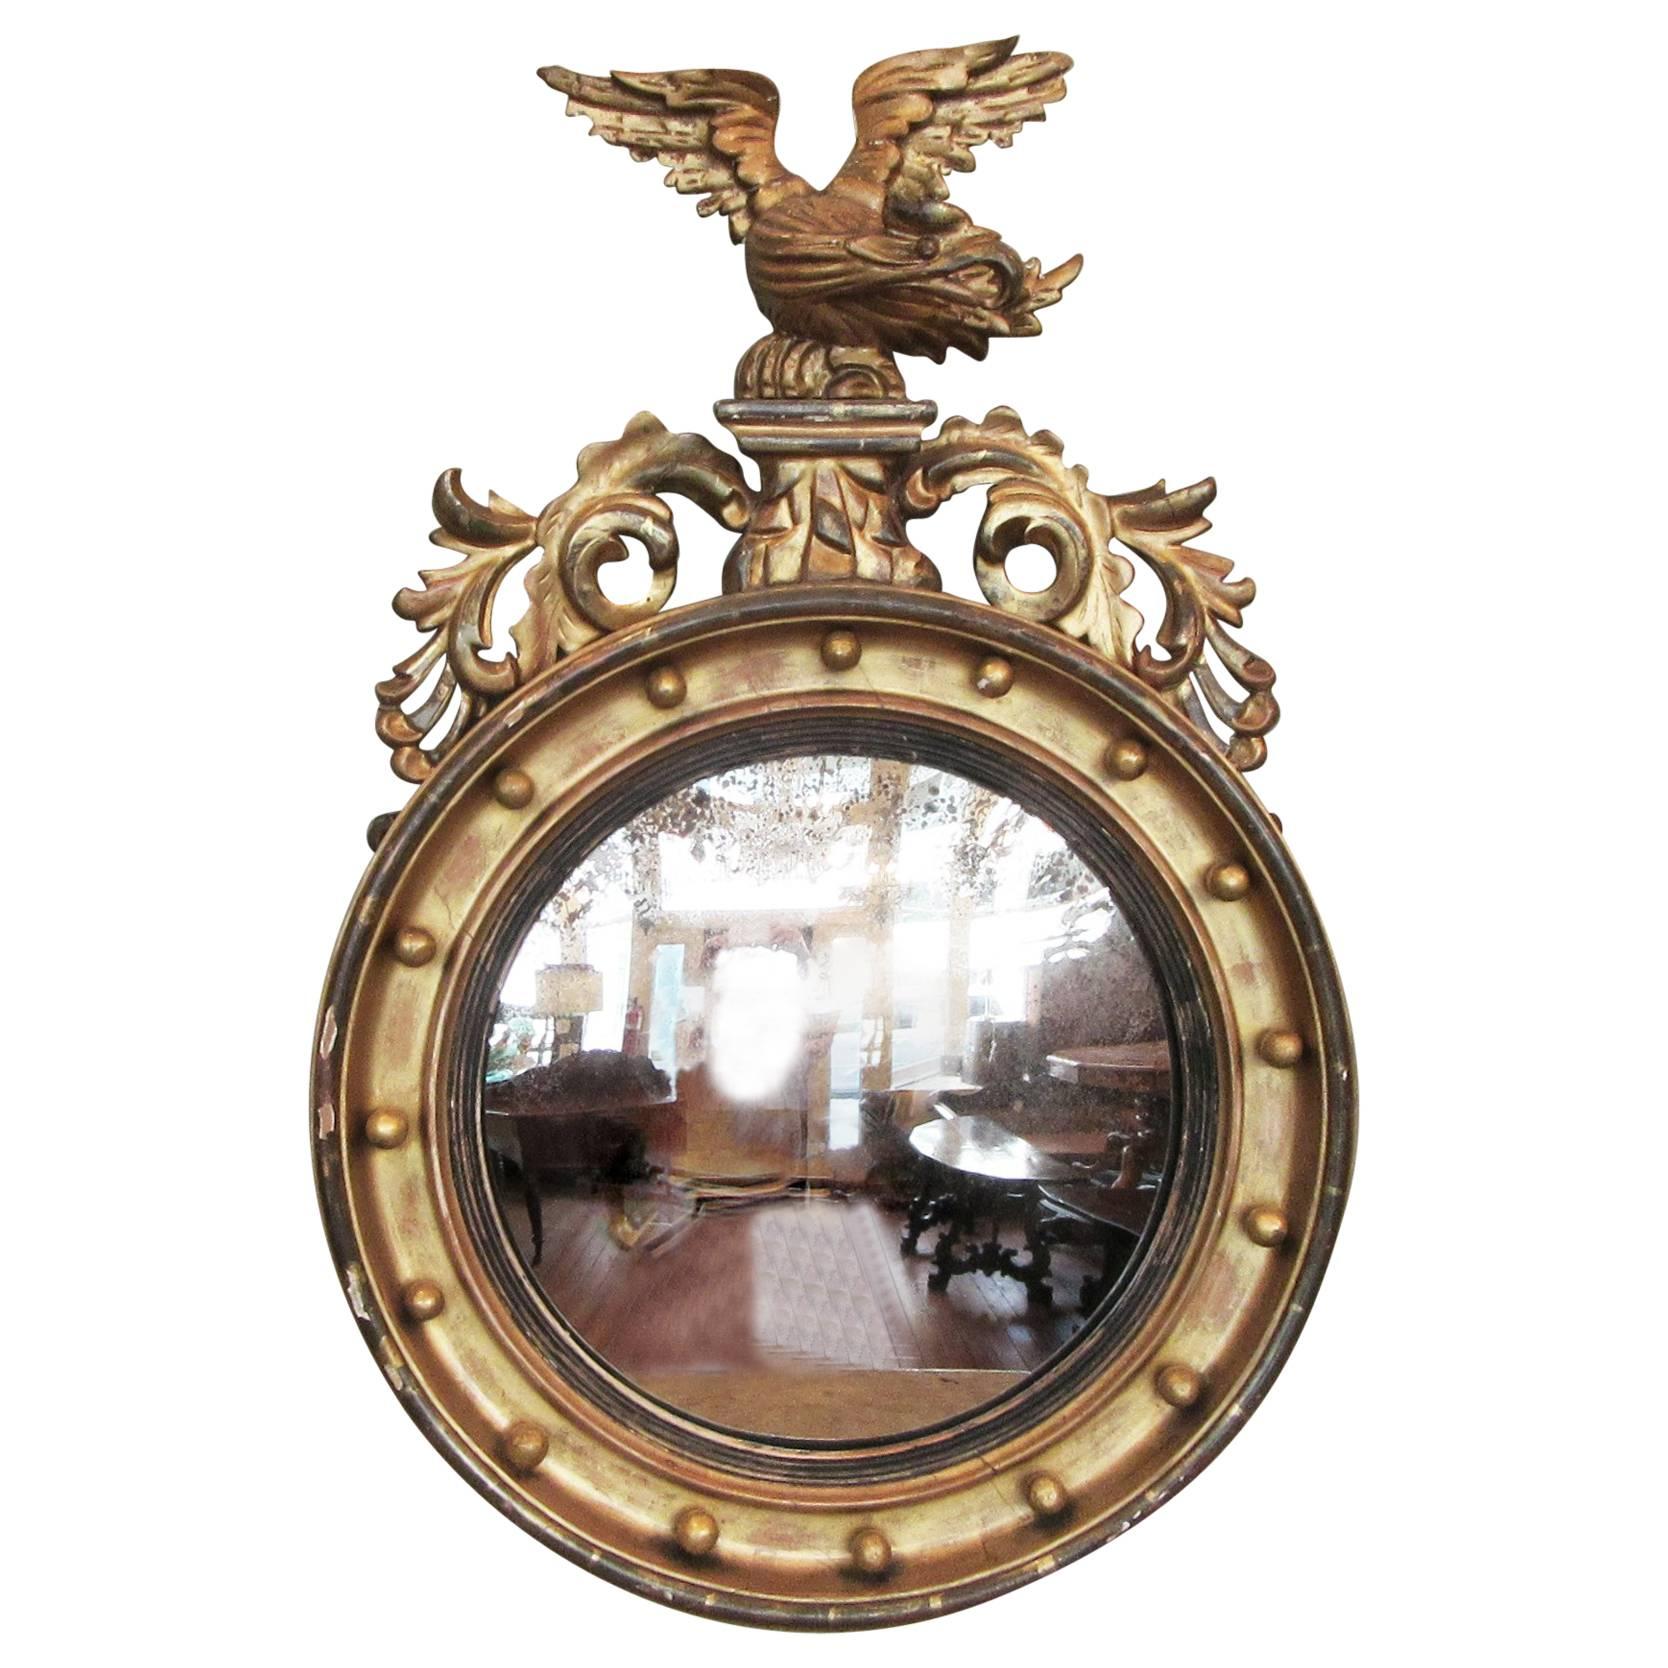 19th Century English Regency Giltwood Convex Mirror with Eagle and Acanthus